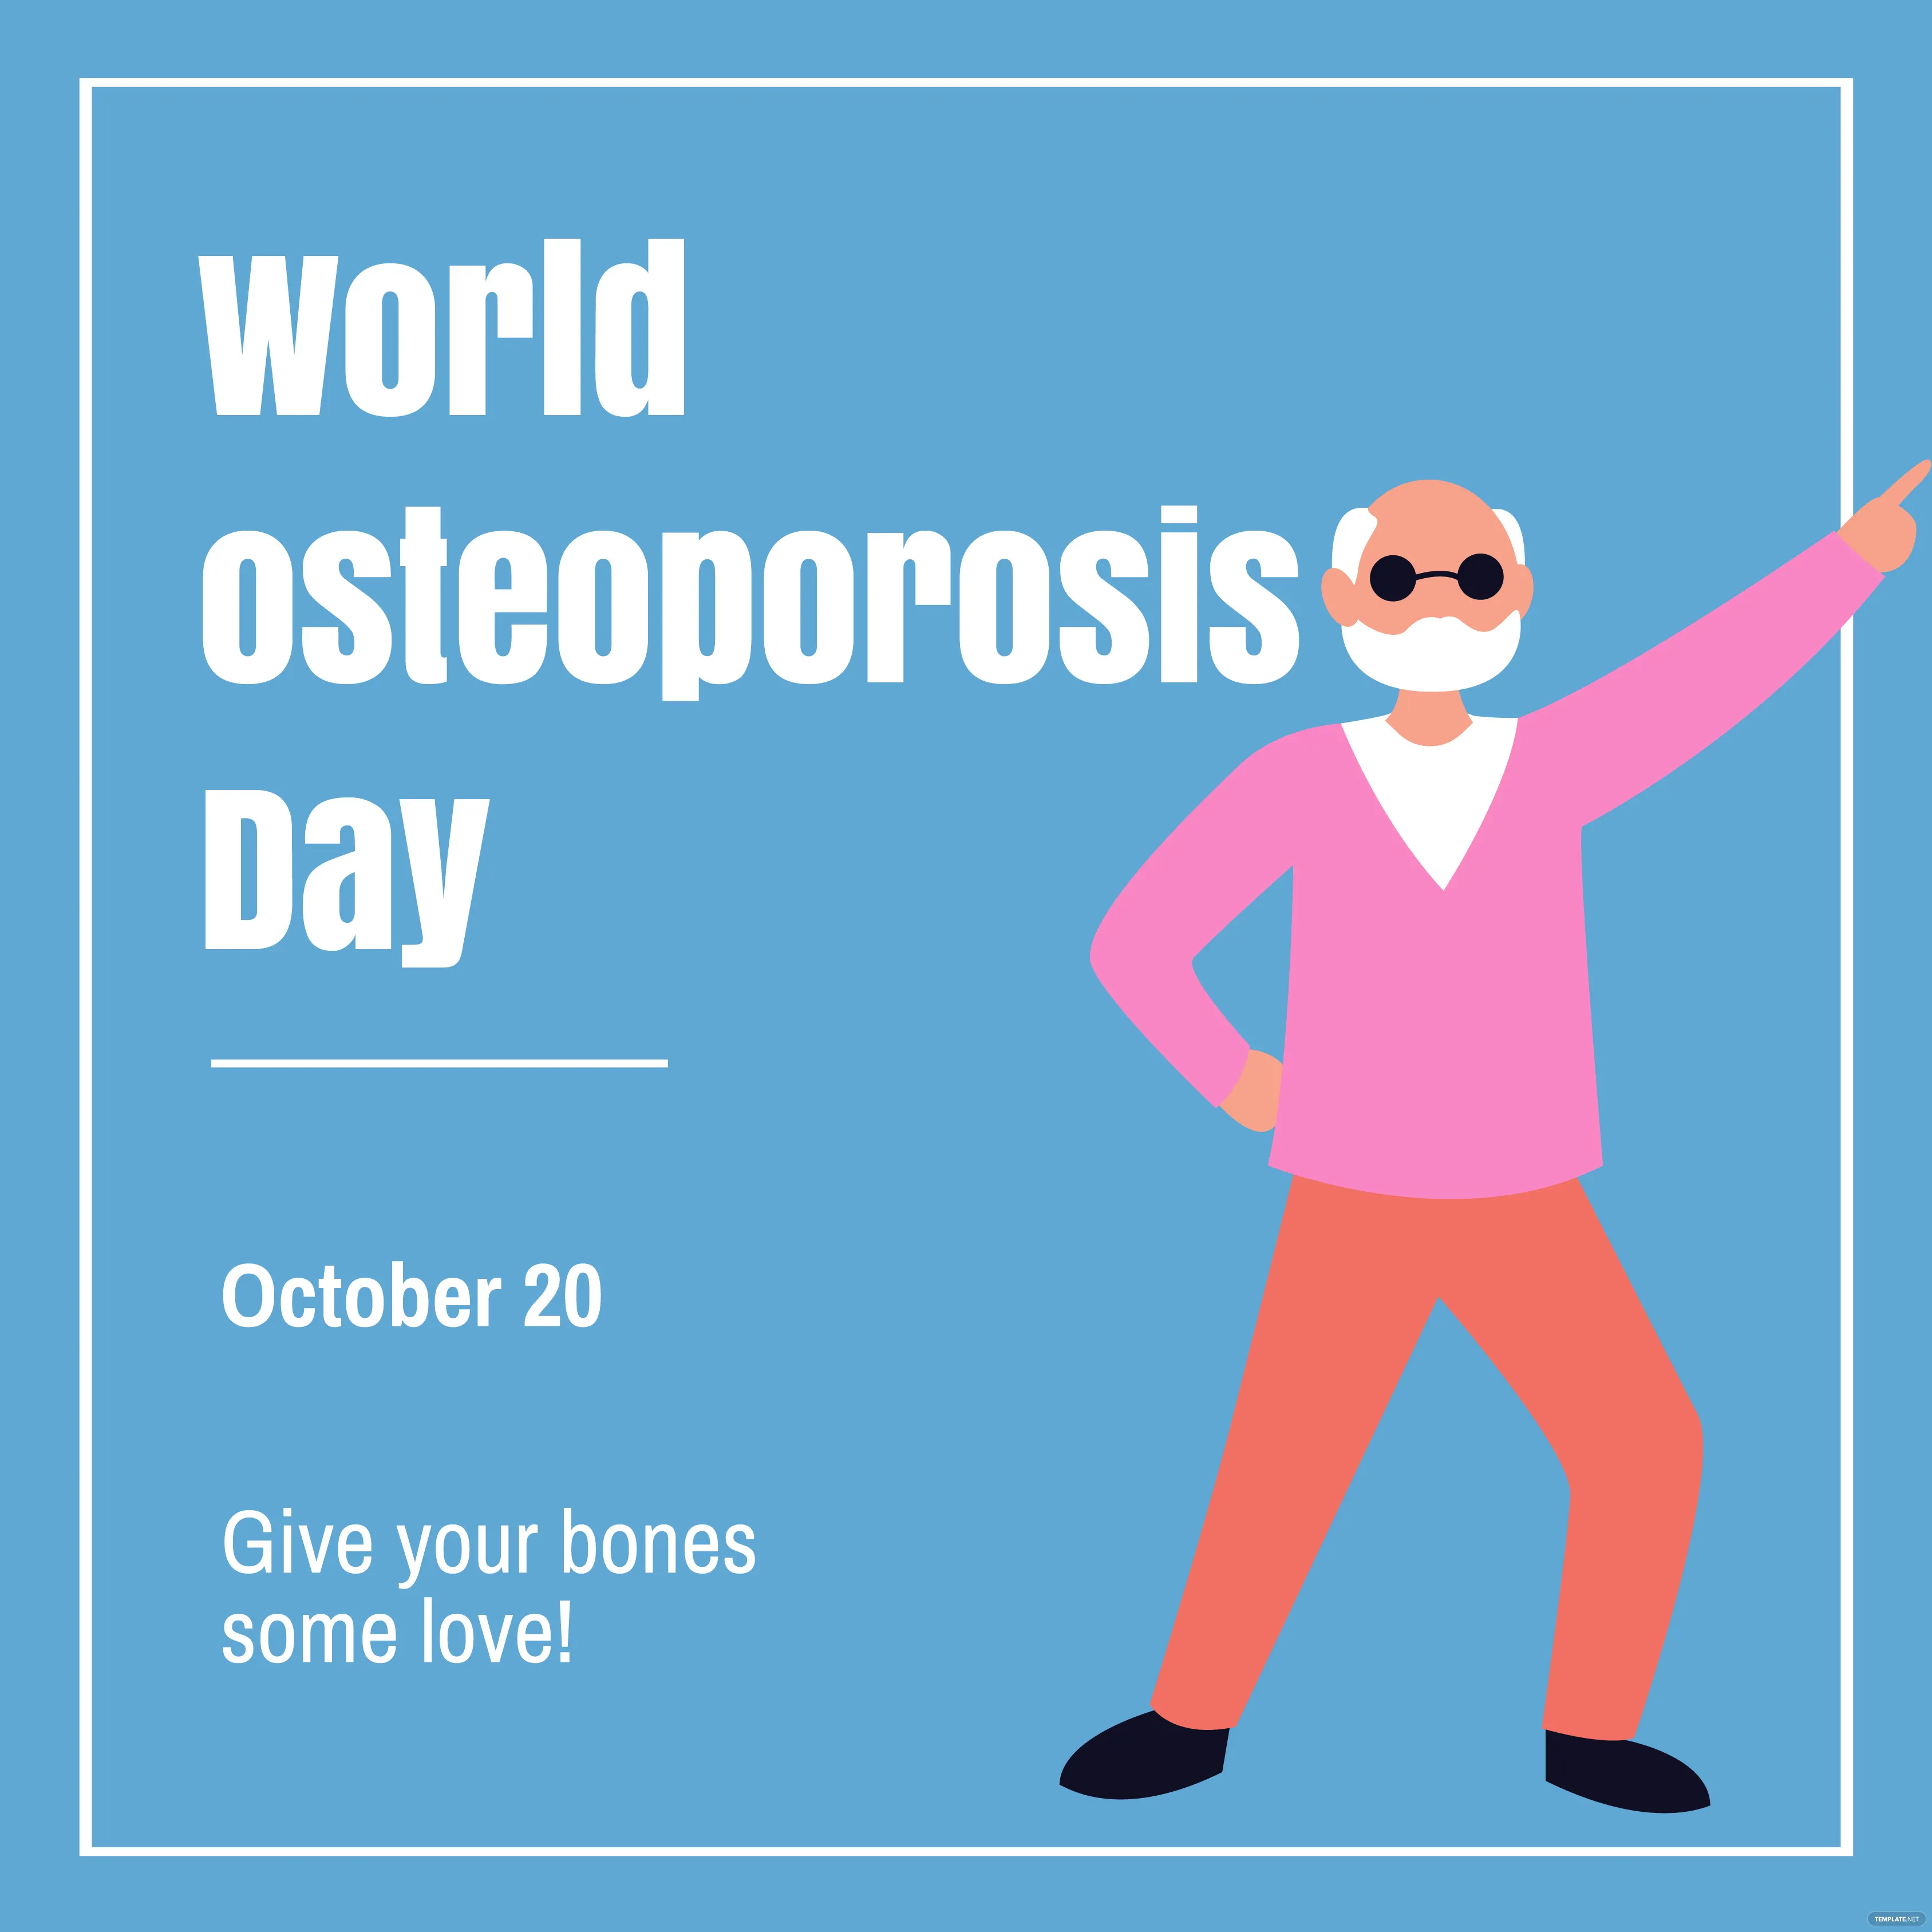 World Osteoporosis Day — October 20